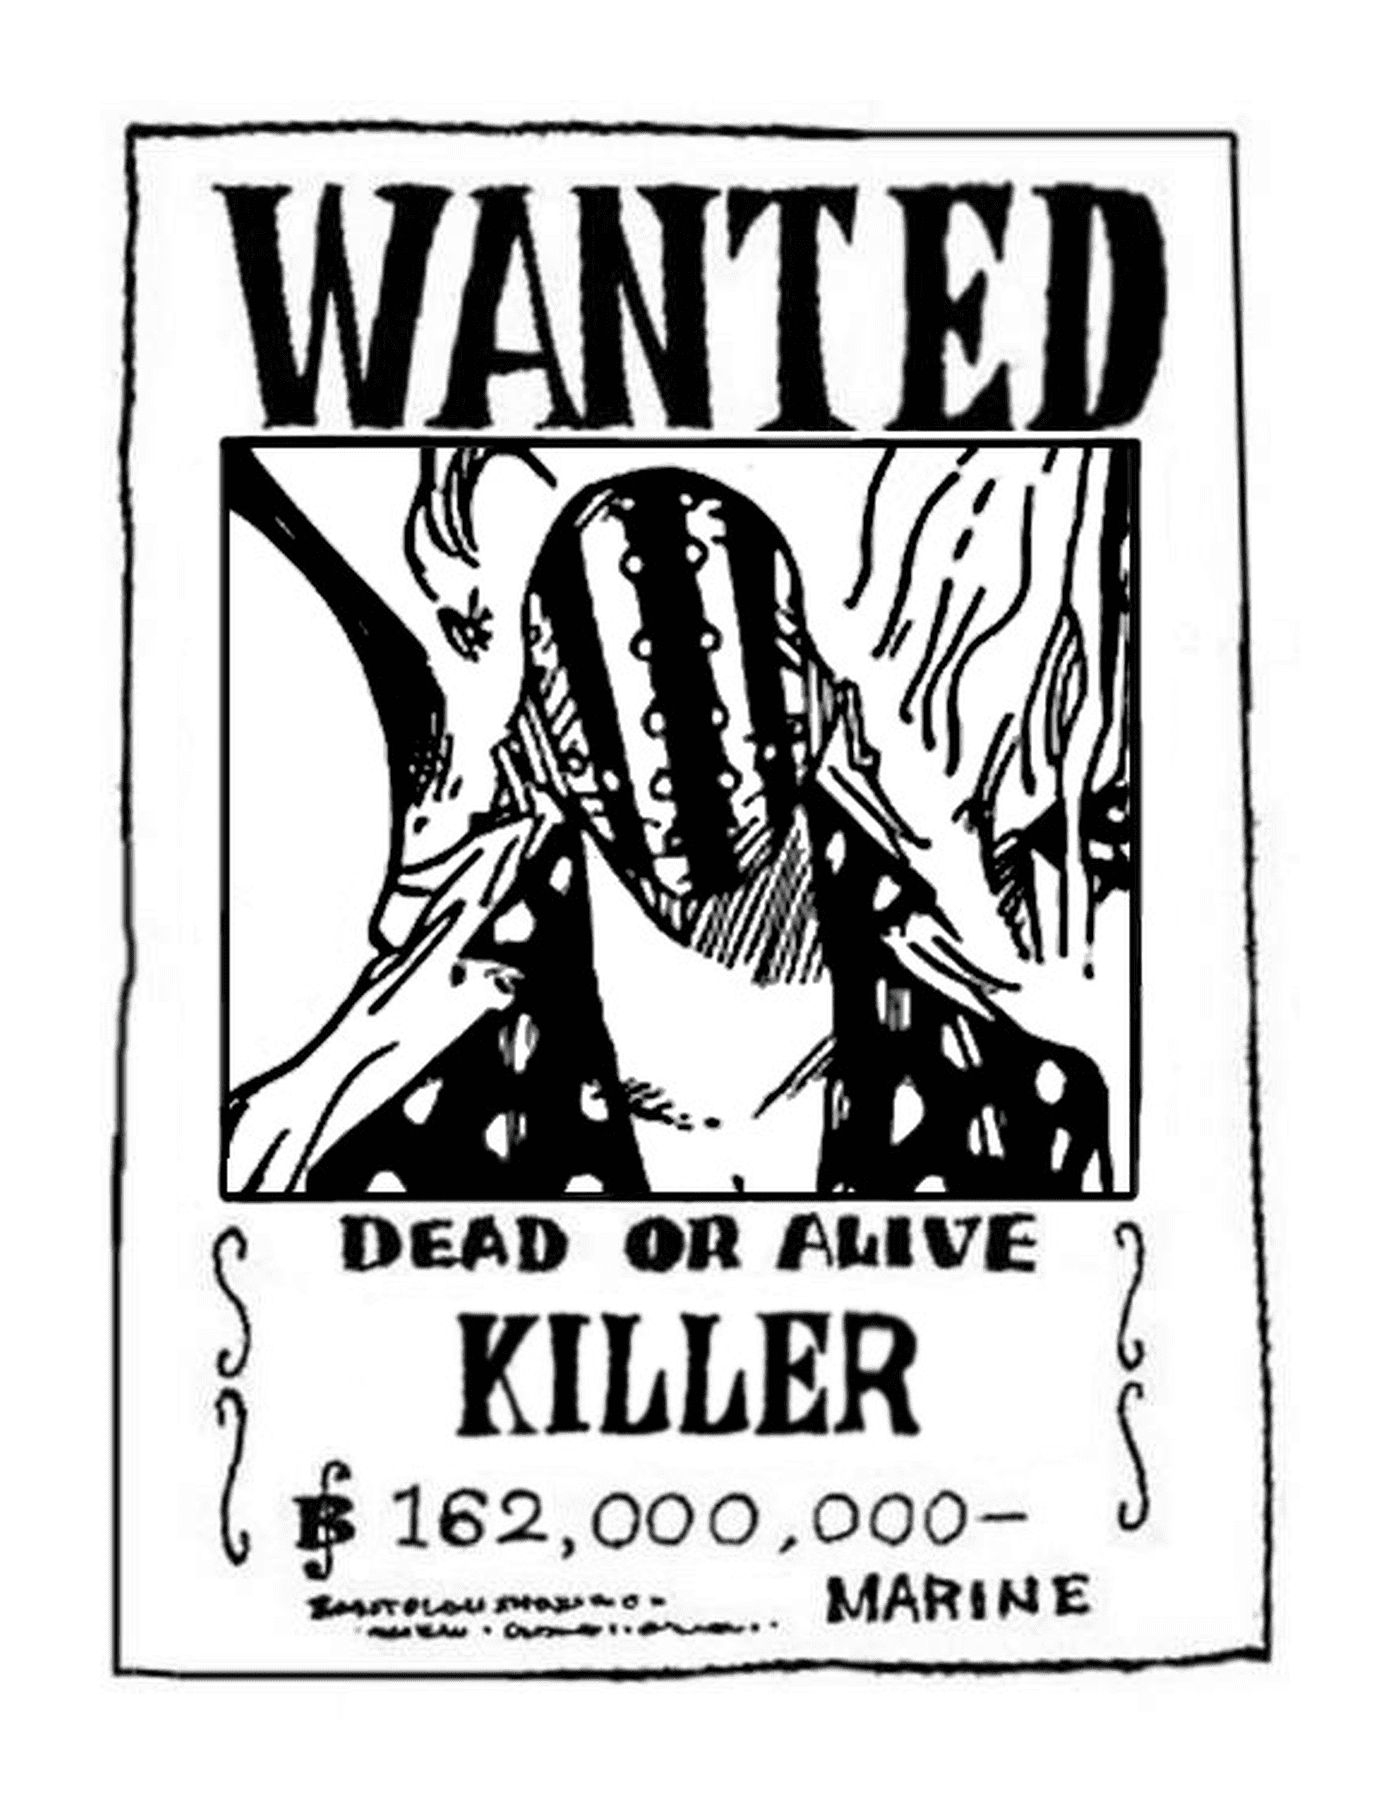  Wanted Killer, dead or alive 